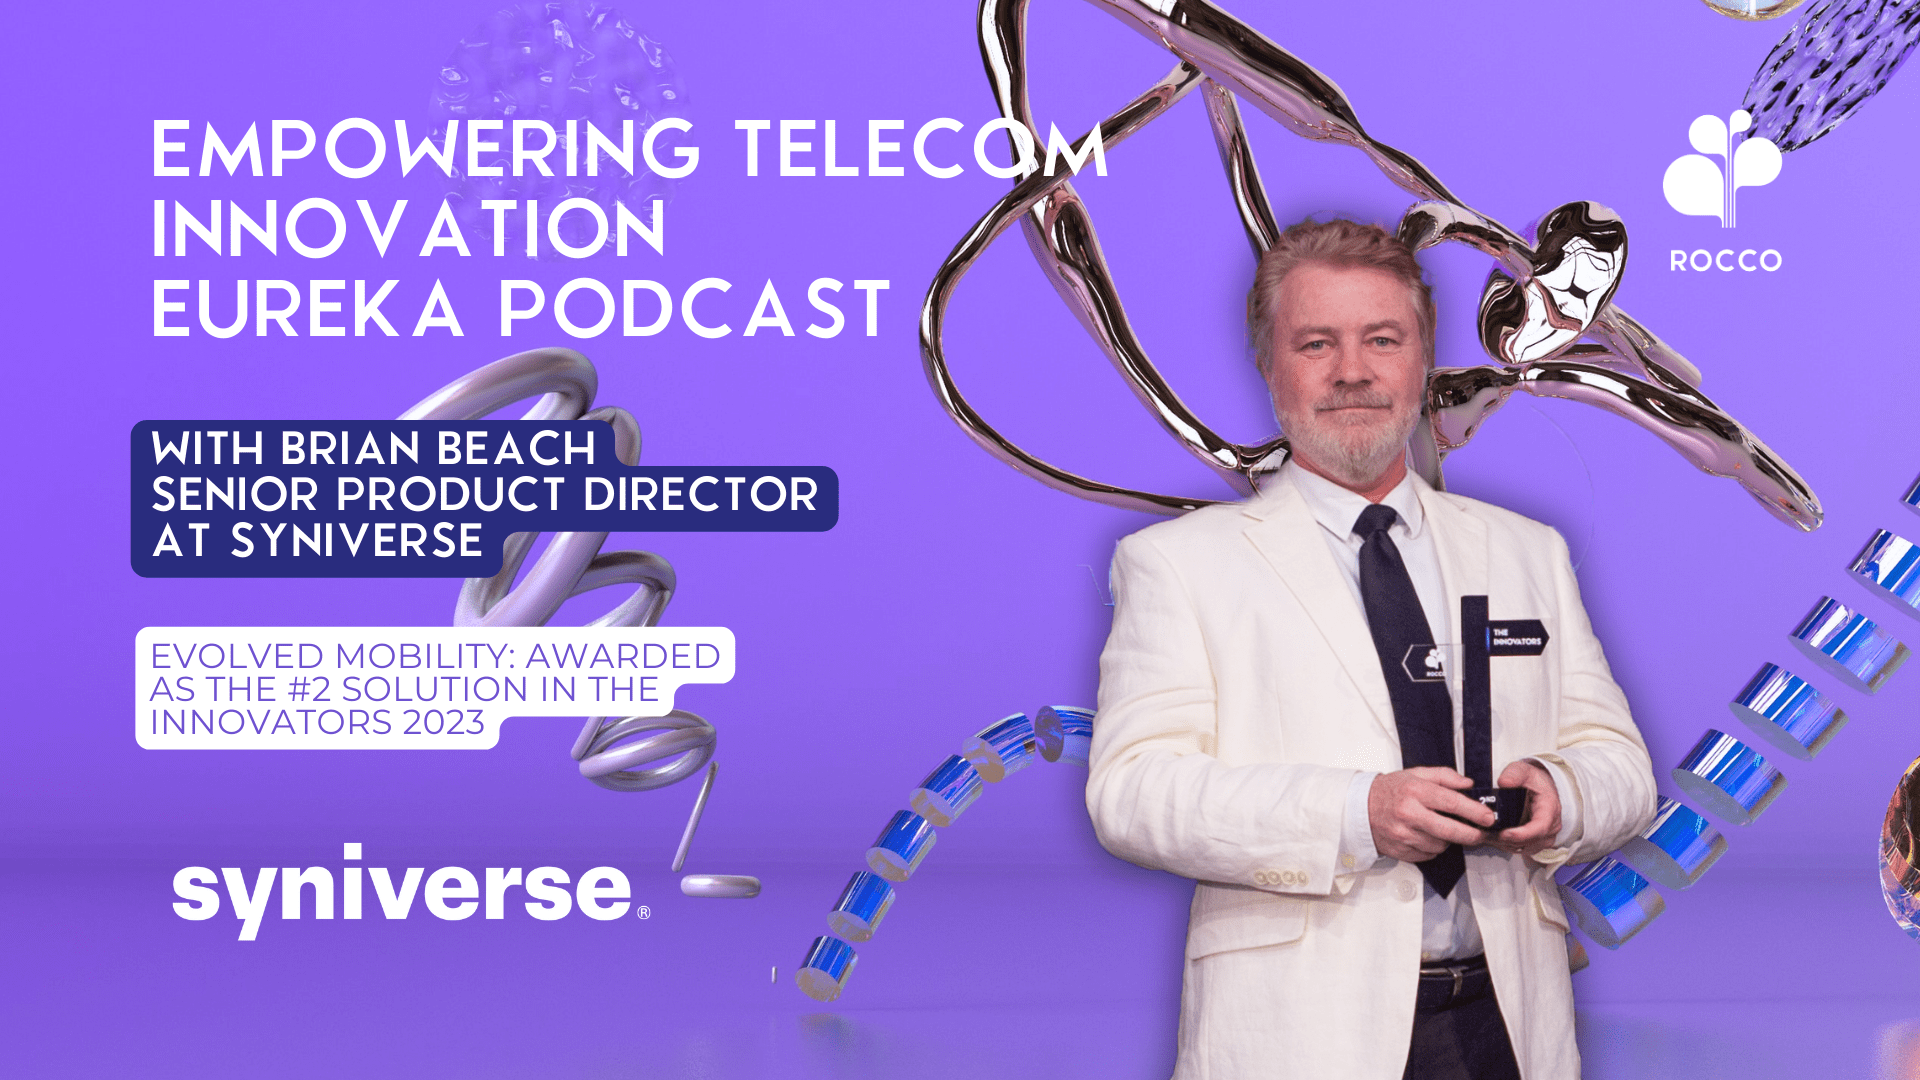 Empowering Telecom Innovation Insights from Brian Beach Senior Product Director at Syniverse